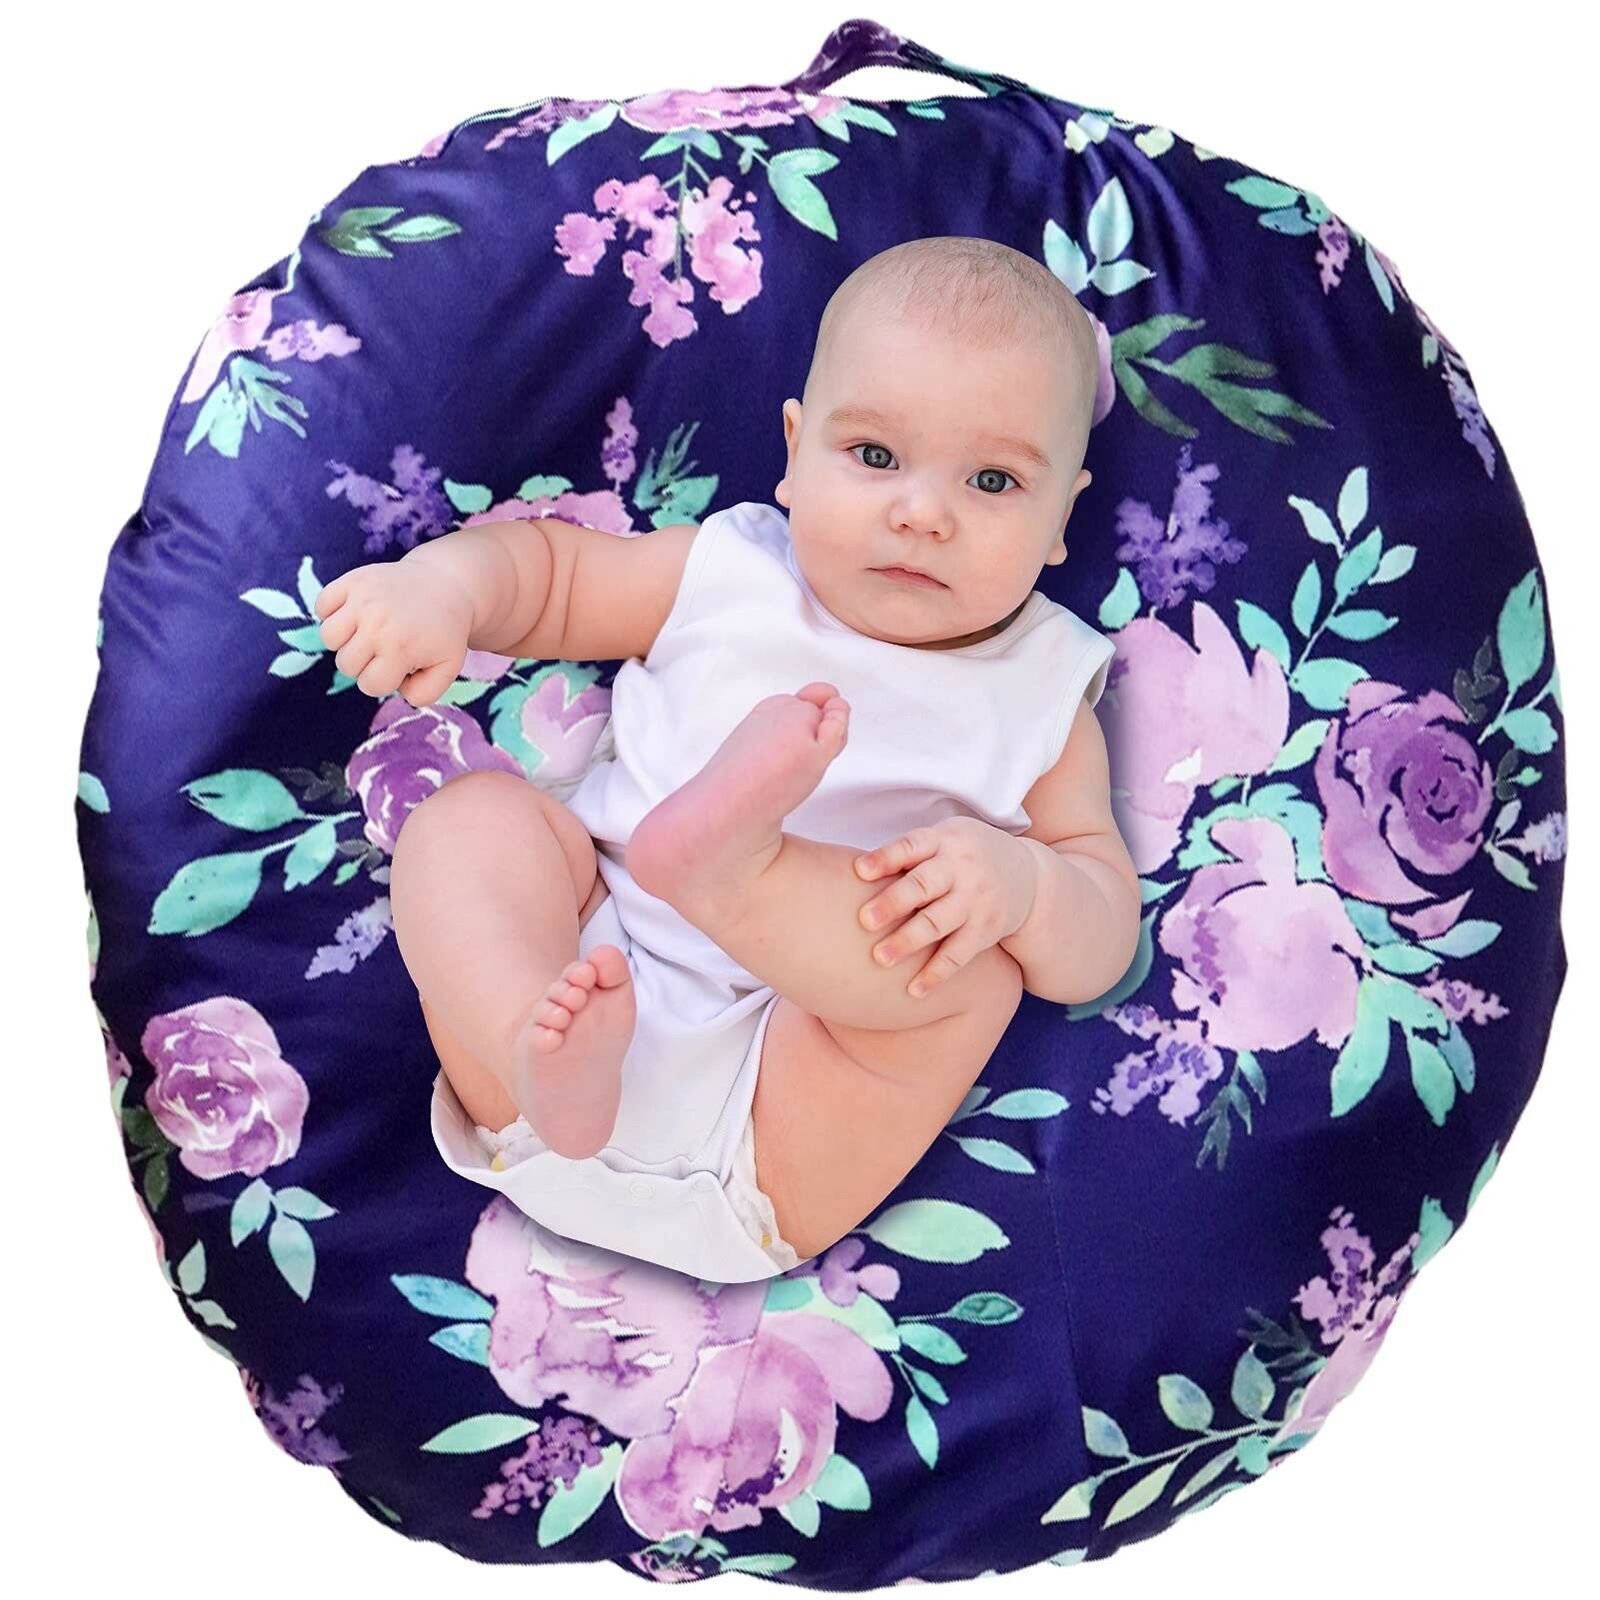 Flower Newborn Lounger Cover, Lounger Cover Purple, Lounger Cover Girl, Breat...